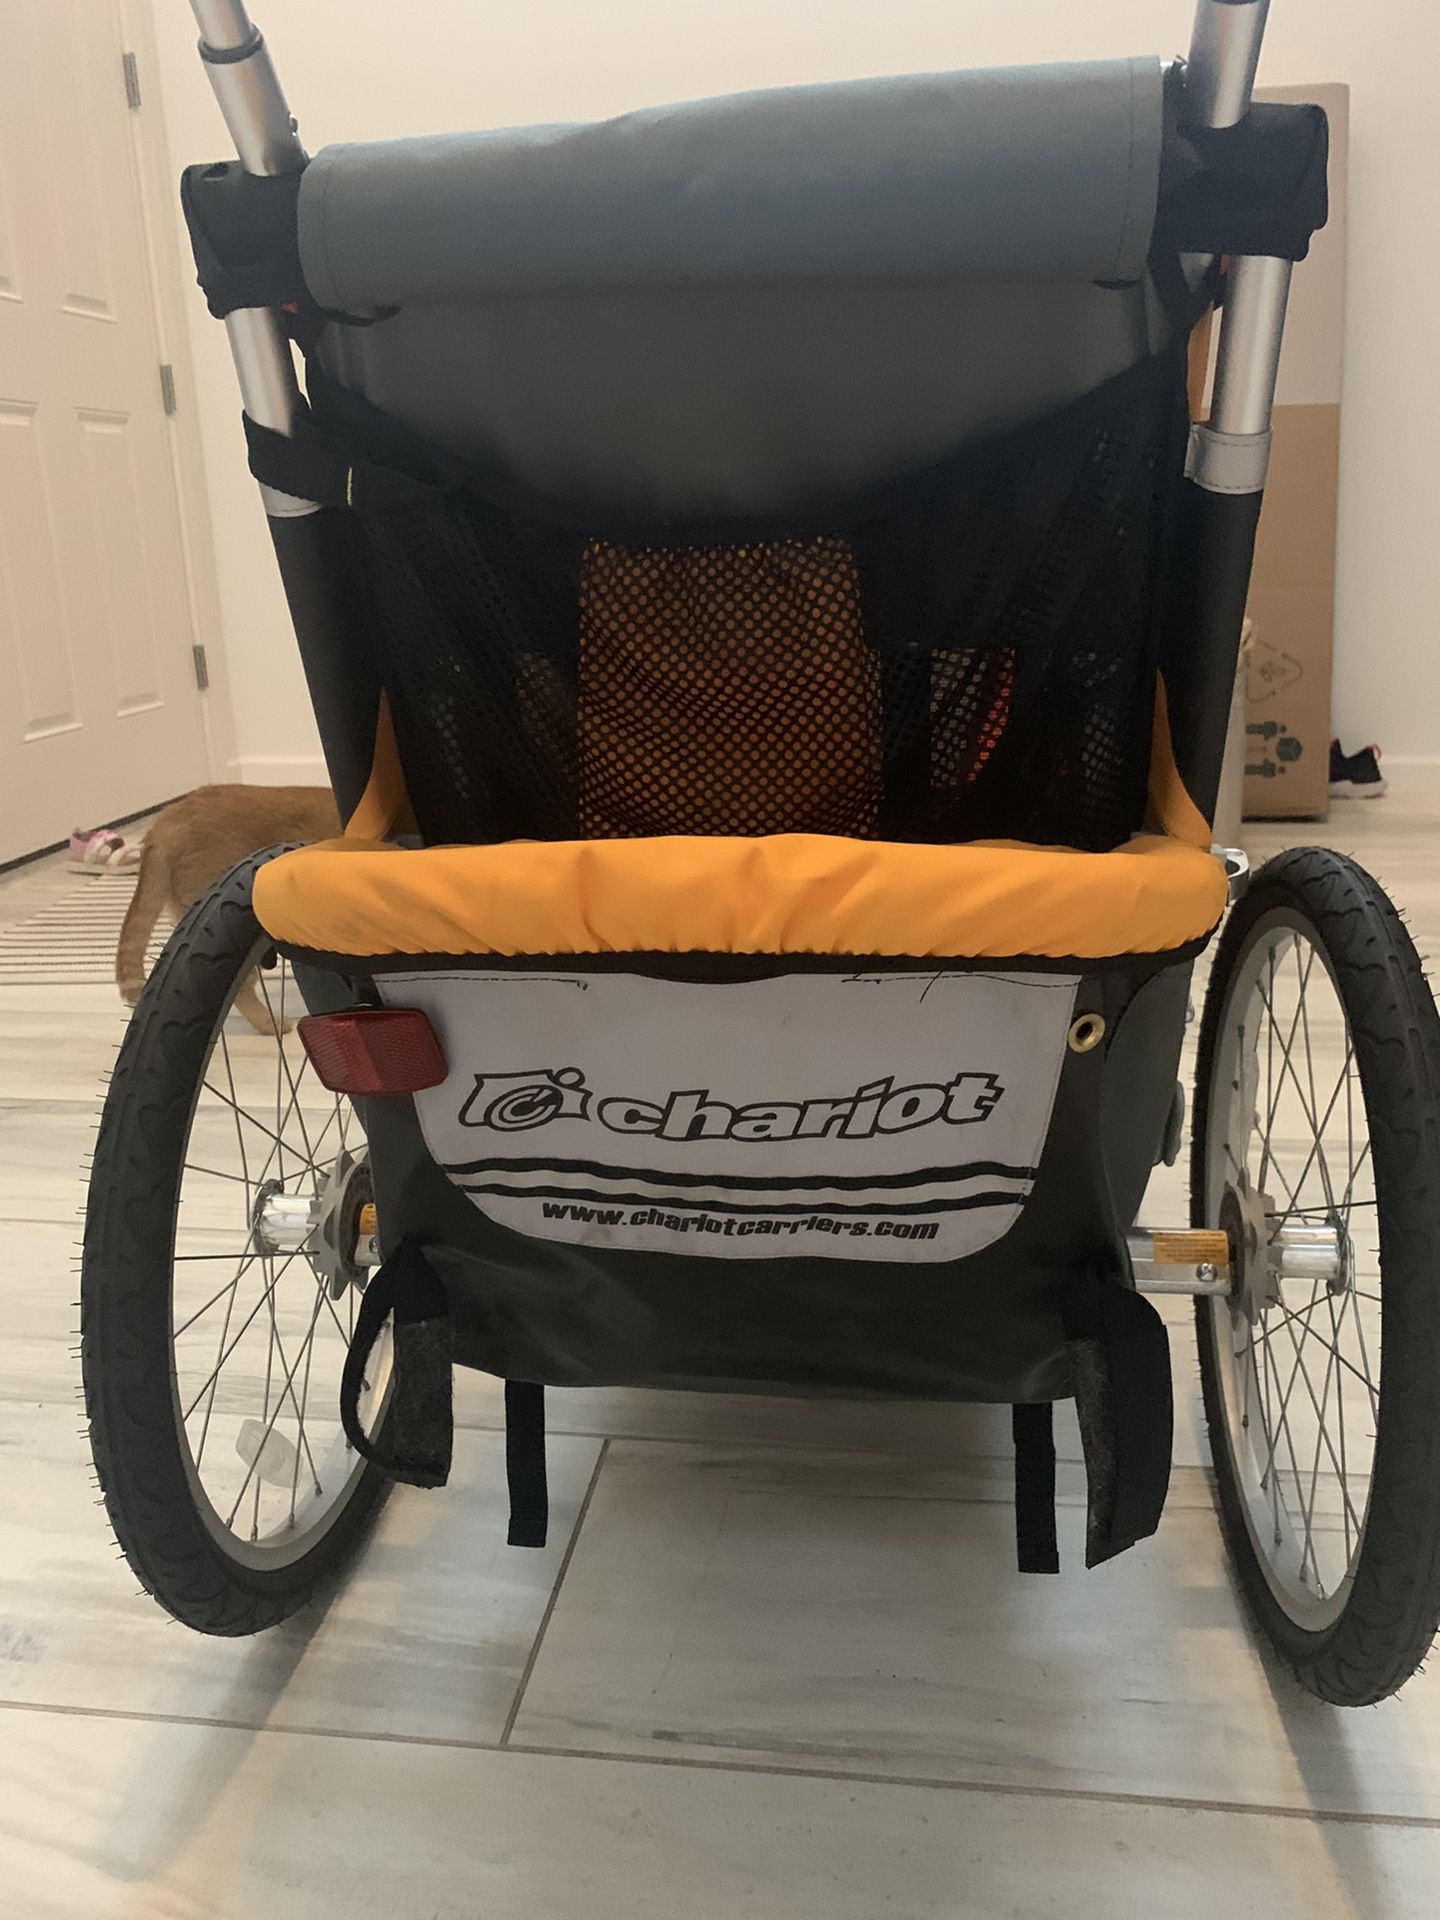  Chariot Bike Trailer For Sale In Excellent Conditions.  Single Rider And Holds Up To 75 Lbs. Only Missing The Hitch But Comes With 